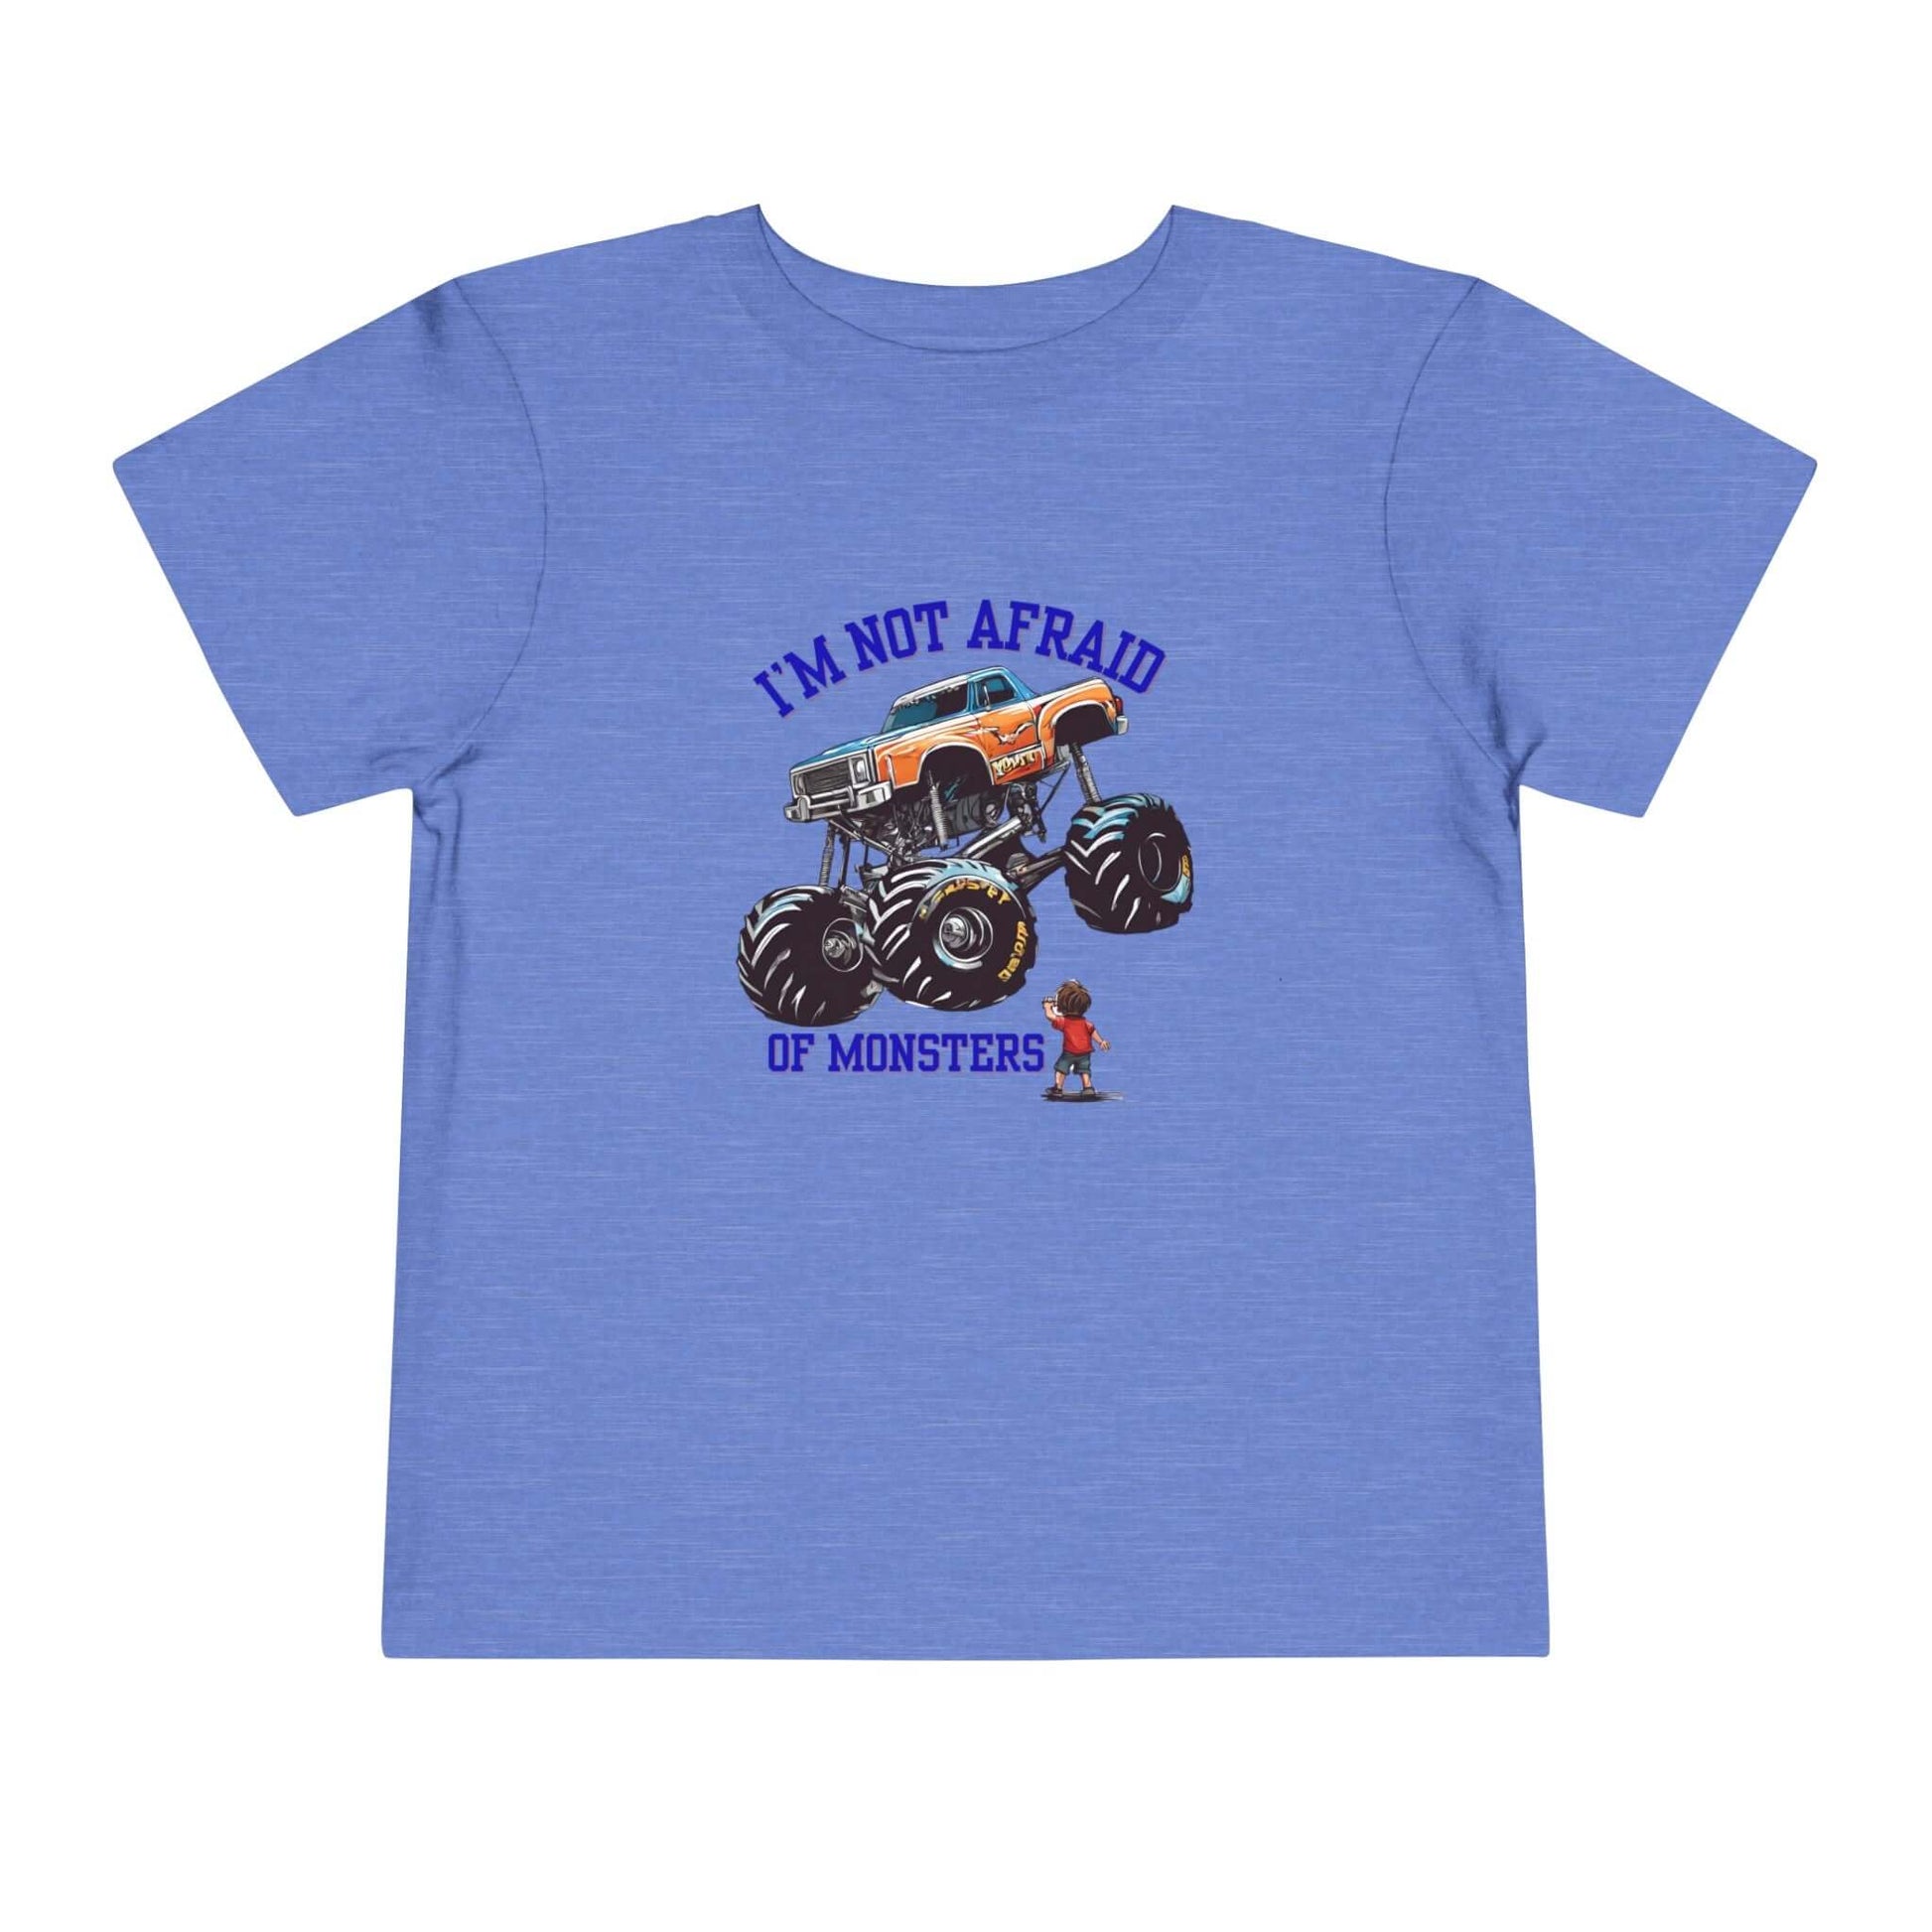 Cotton,Crew neck,DTG,Kids' Clothing,Monster truck shirt kids,Monster truck tshirt,Neck Labels,Regular fit,T-shirts